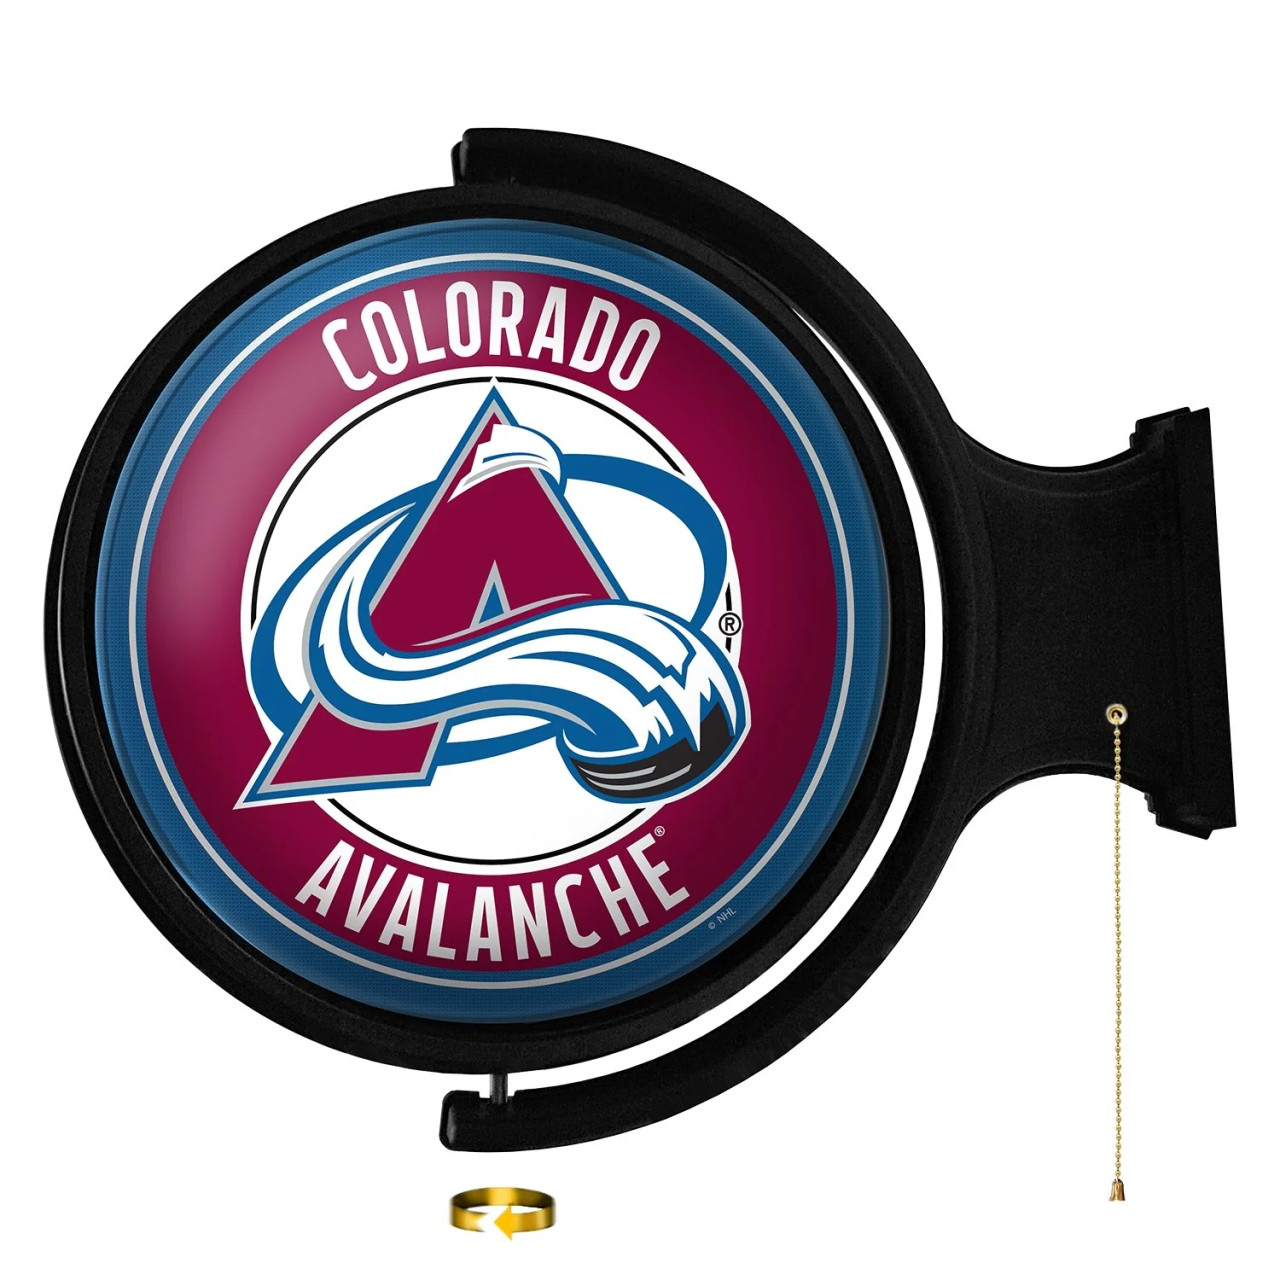 NHCOLO-115-01, CO, COL, Colorado, Avalanche, Original, Round, Rotating, Lighted, Wall, Sign, NHCOLO-115-01, NHL, The Fan-Brand, 686082112857